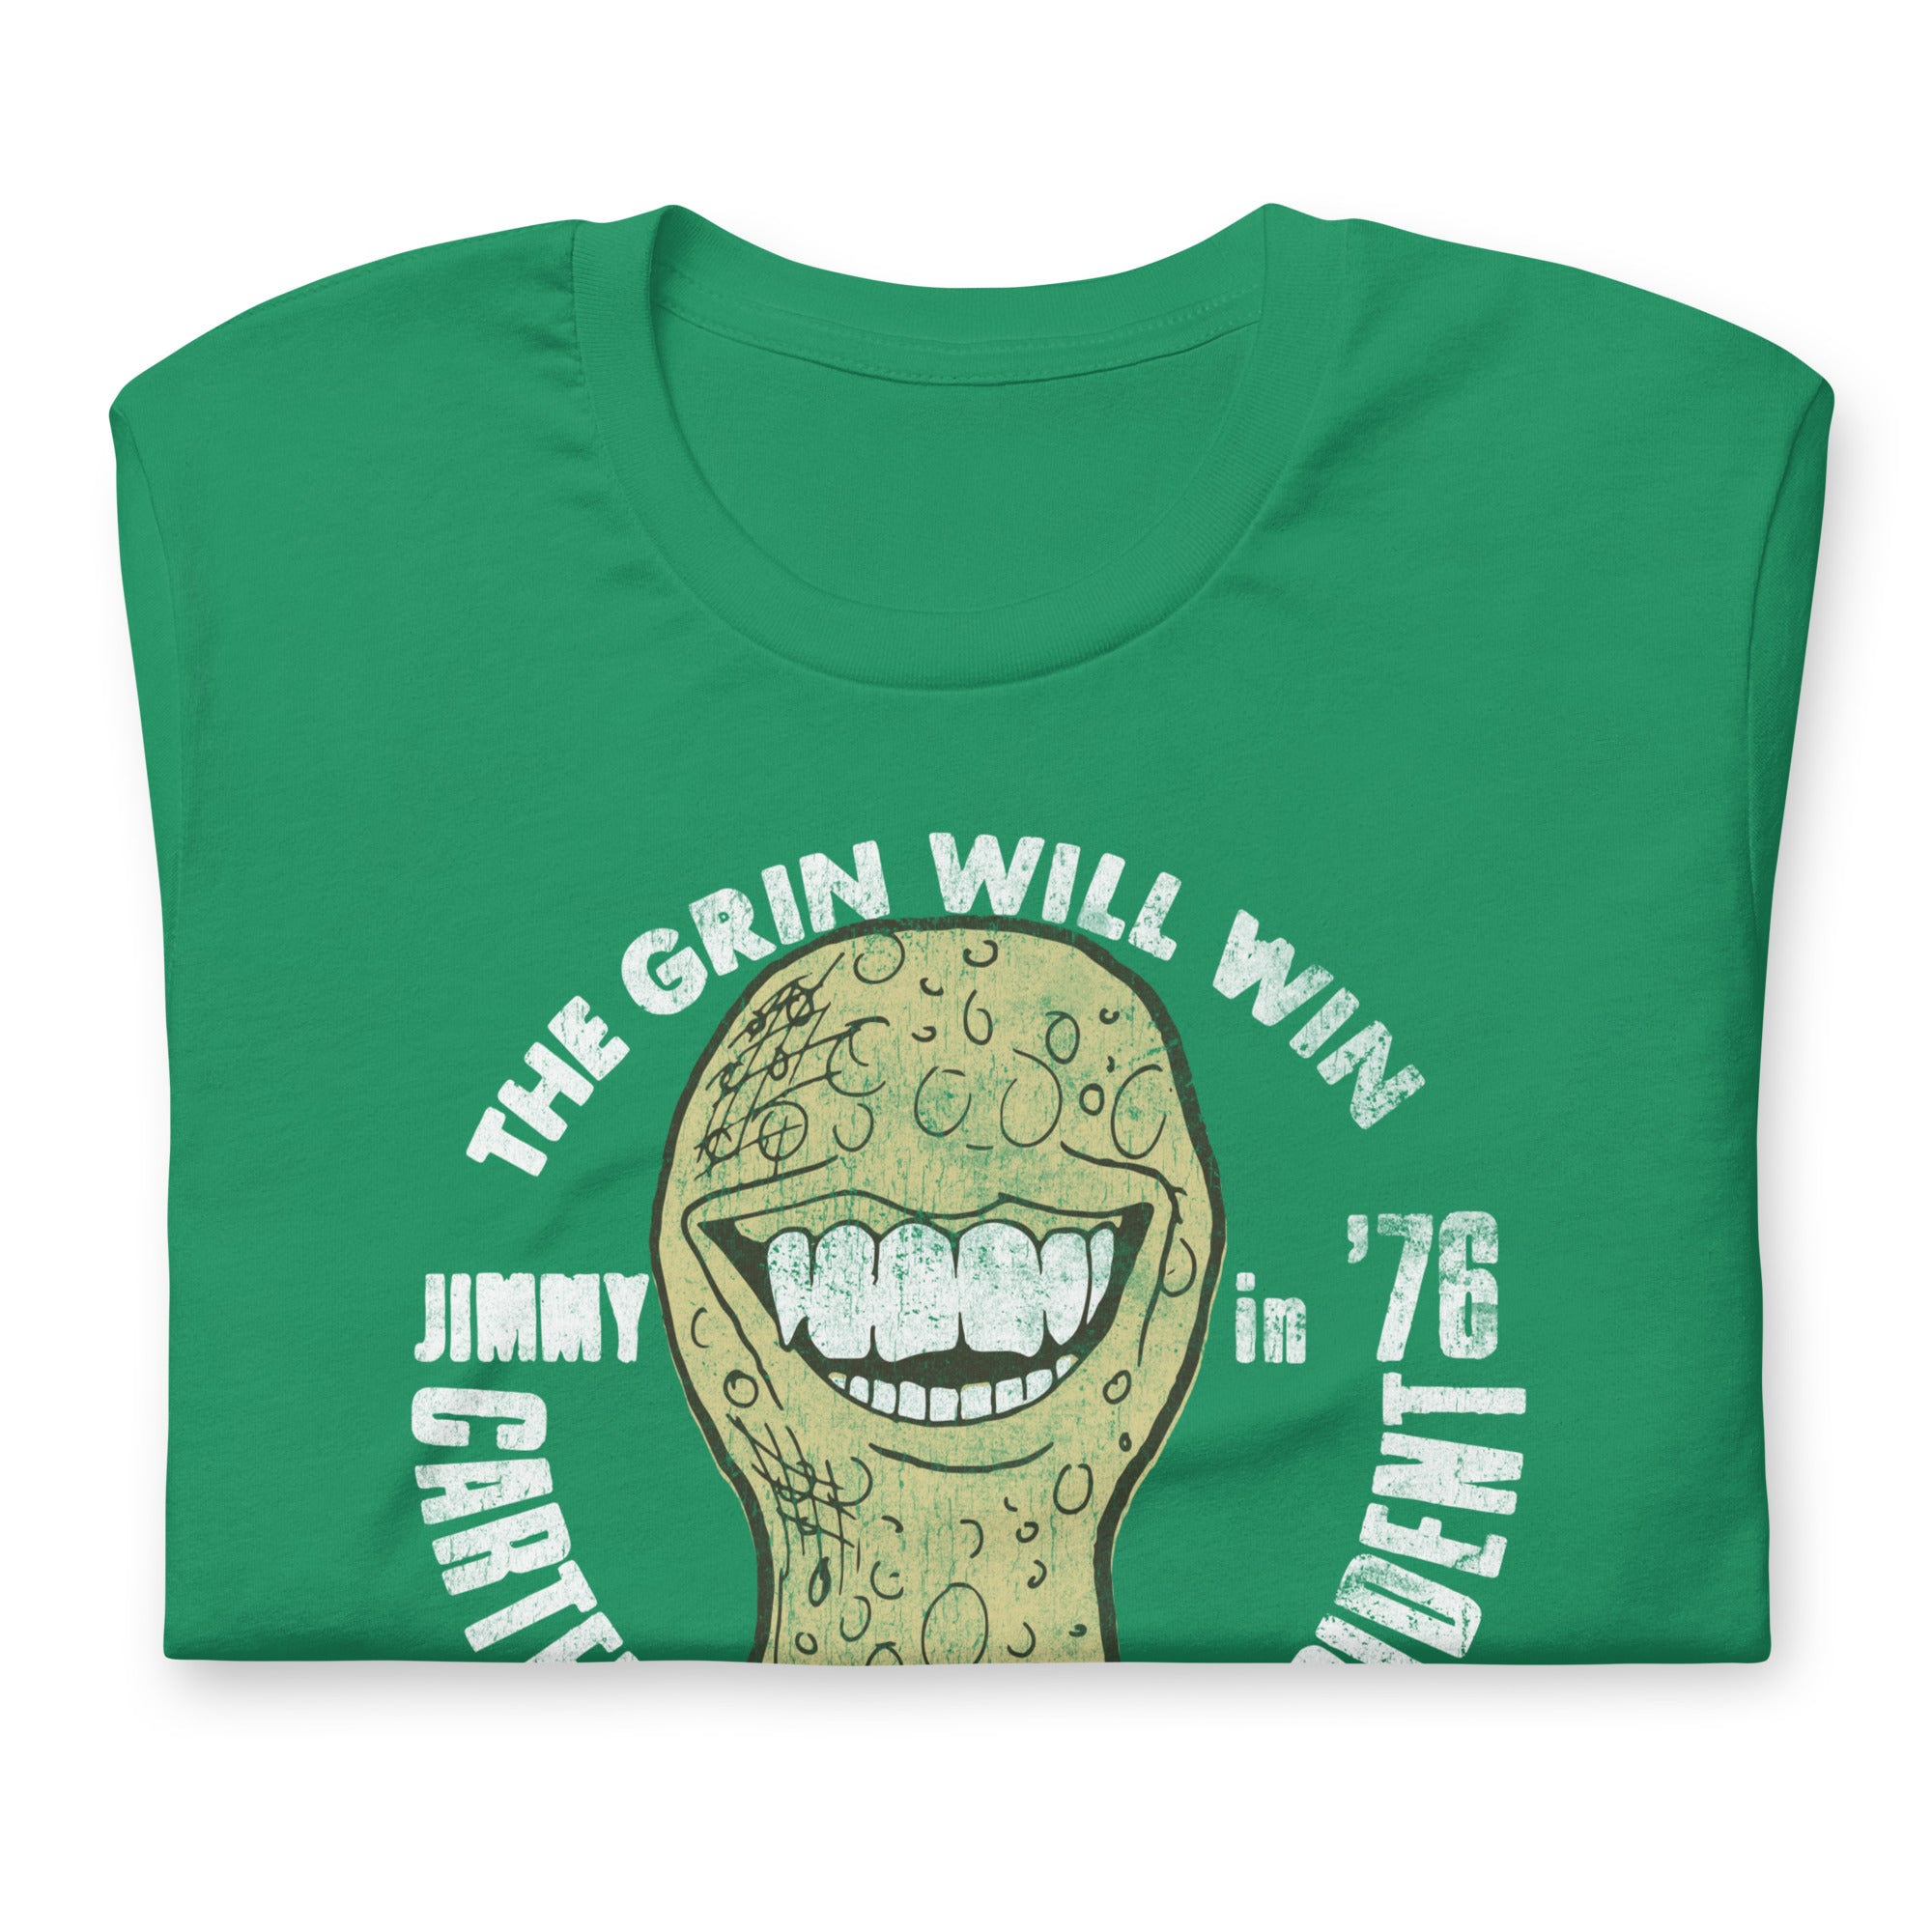 The Grin Will Win 1976 Jimmy Carter Distressed Campaign T-Shirt